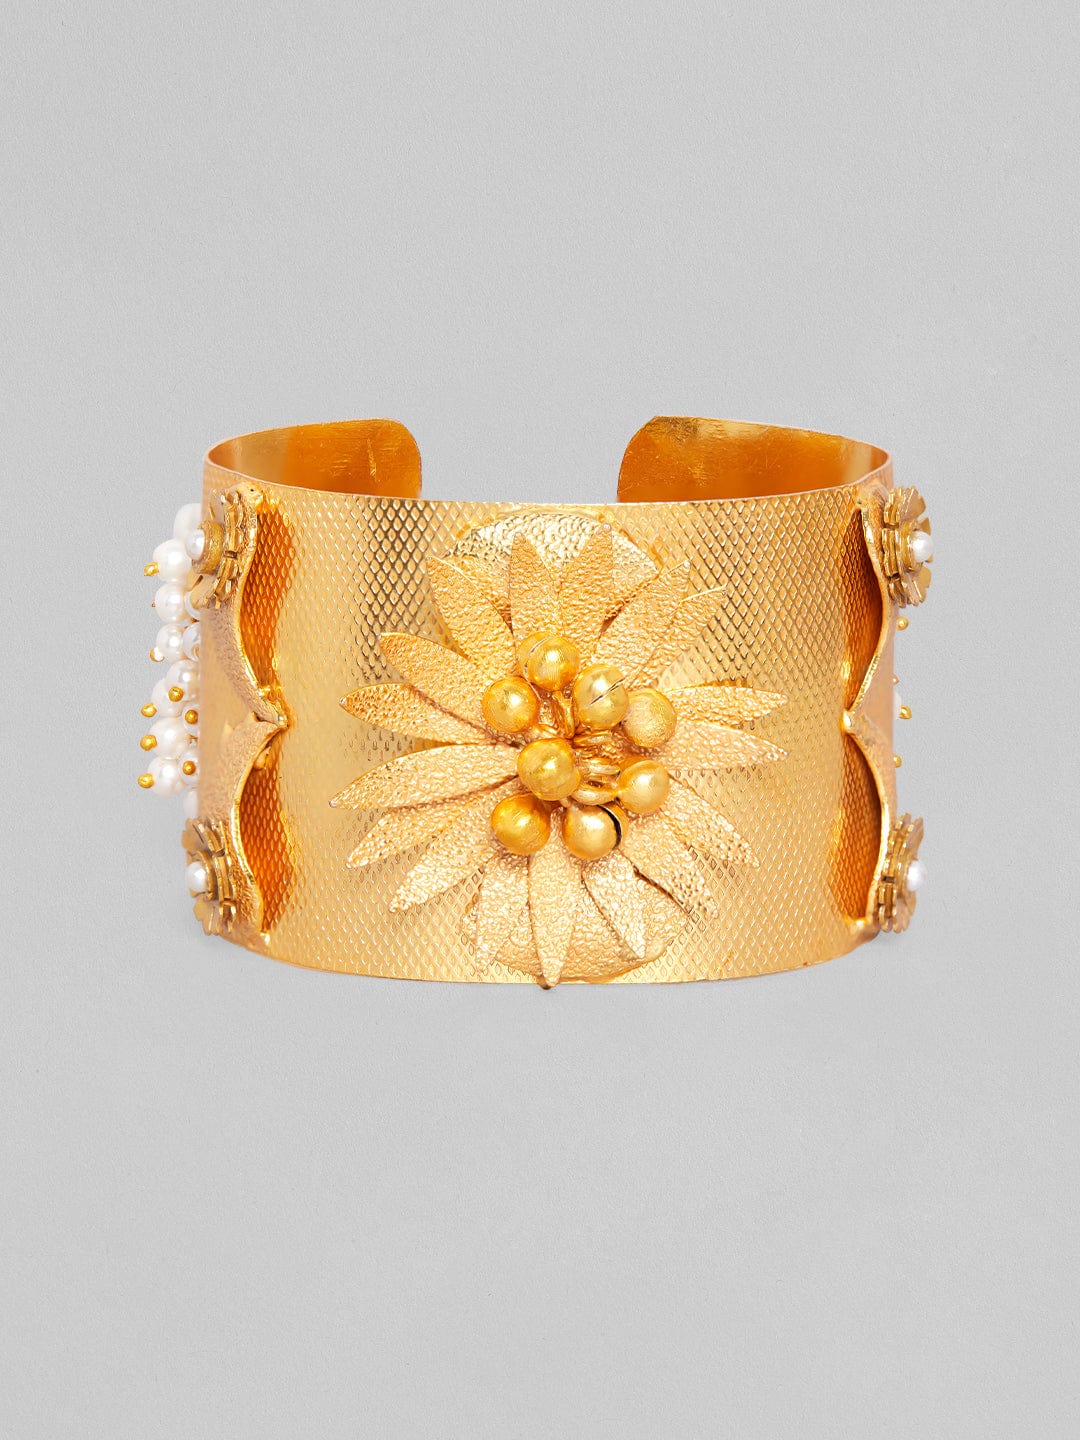 Petals  Sundust  Hammered Gold Cuff Bracelet  18k Gold Electroplated   Petals  by Green Global Europe Limited